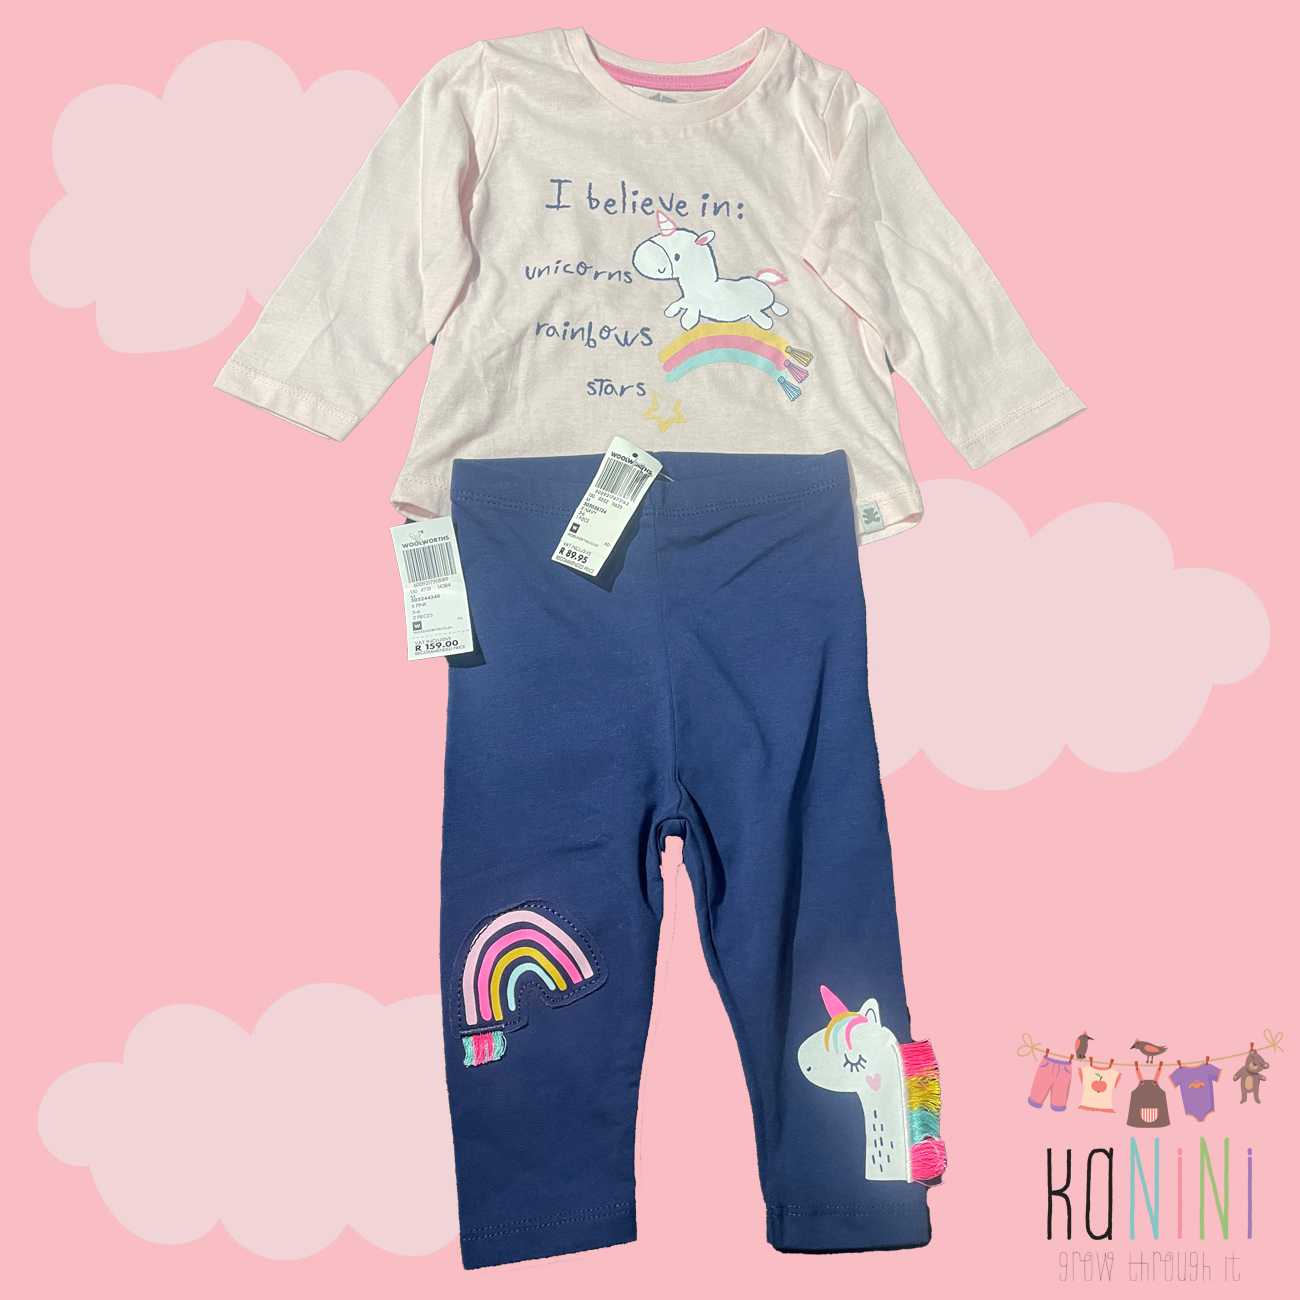 Featured image for “Woolworths 3 - 6 Months Girls Top & Legging Set”